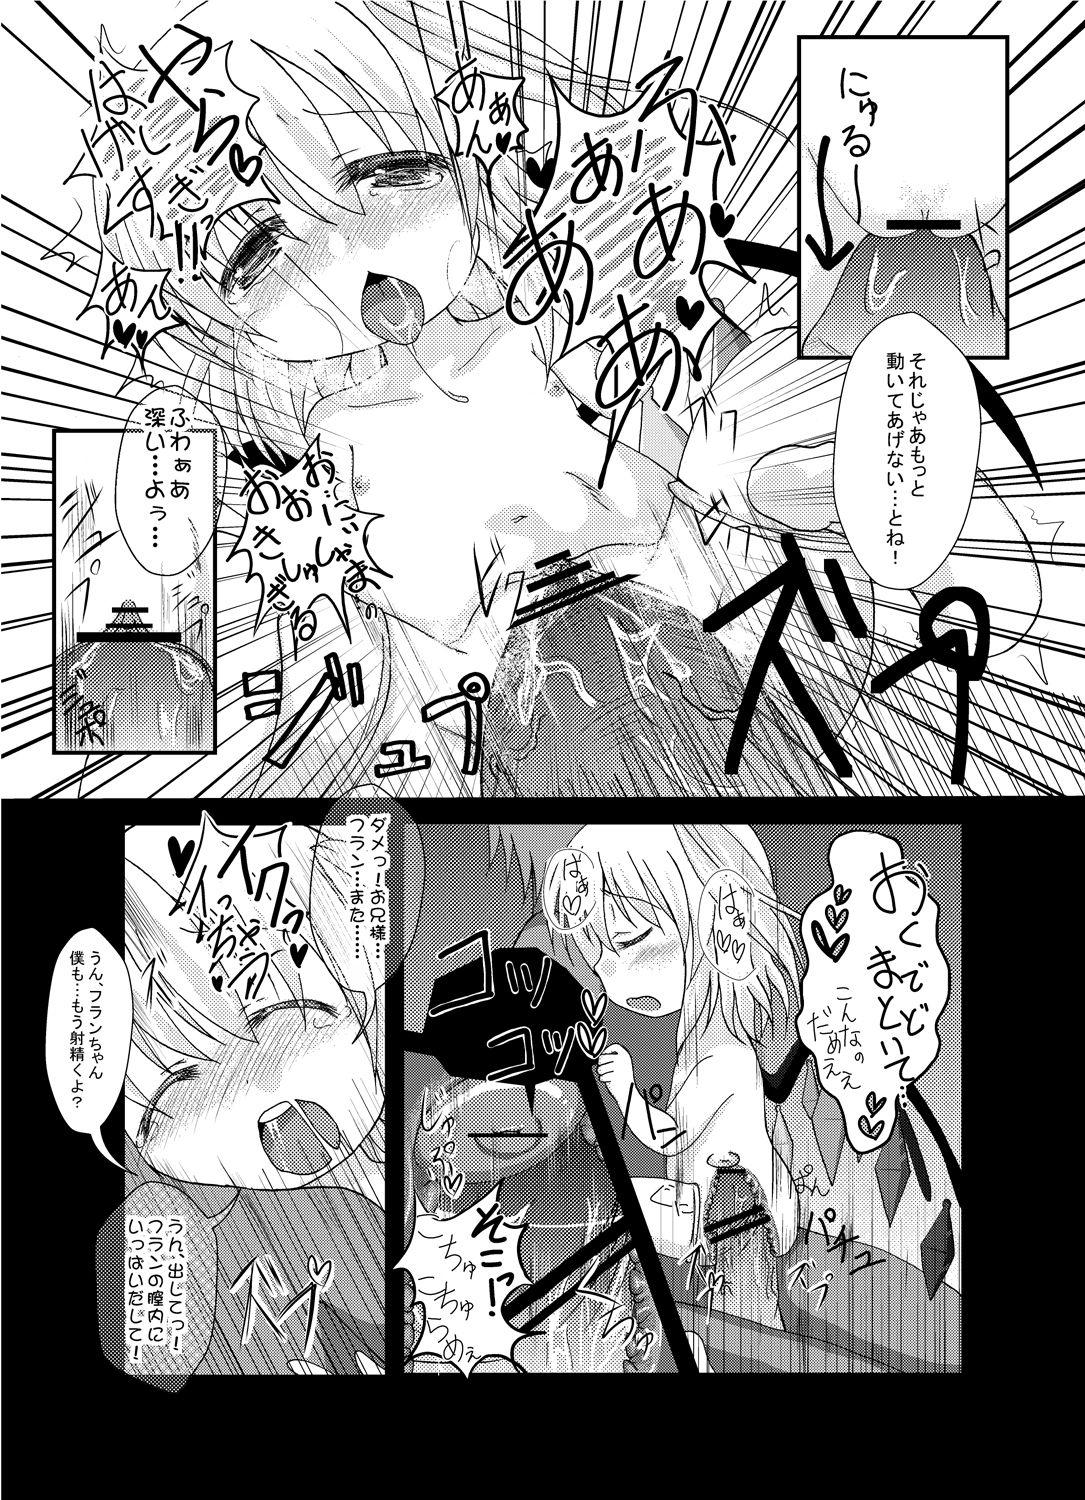 Leite フランちゃんと遊ぼう まとめ - Touhou project Moms - Page 13